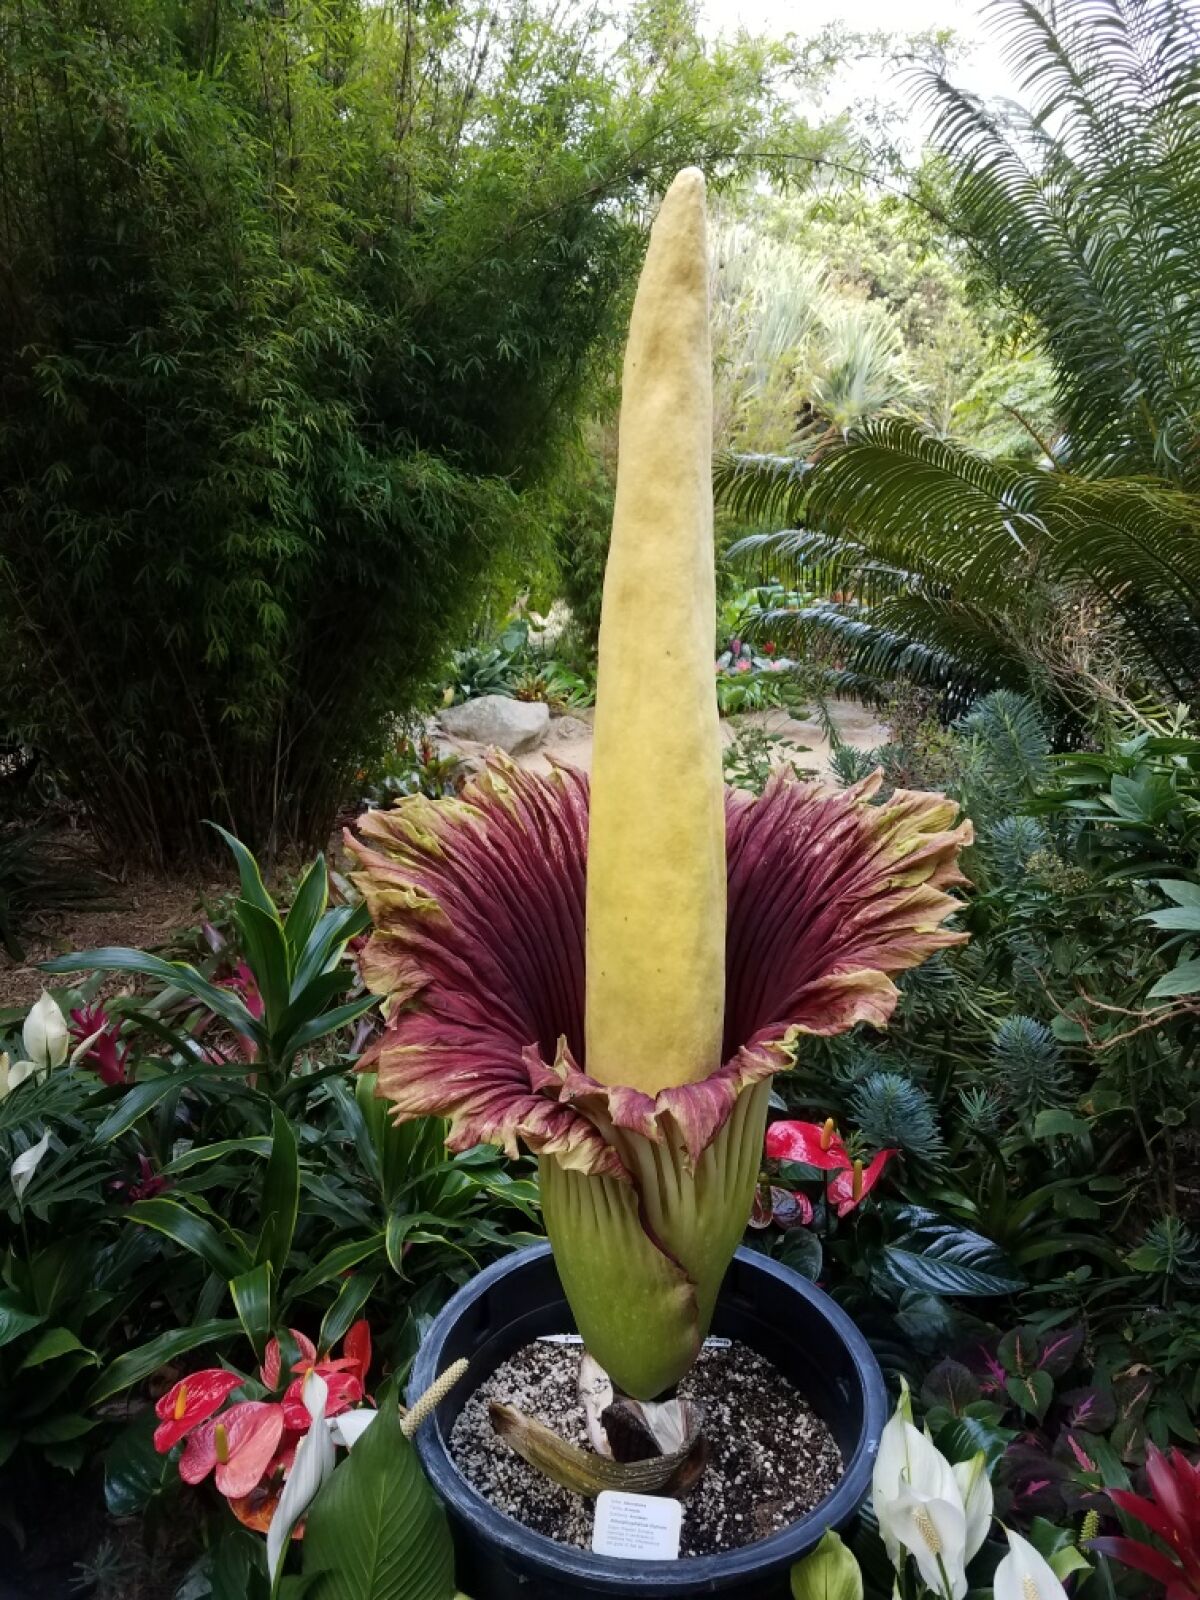 A titan arum or corpse flower plant photographed in full bloom at the San Diego Botanic Garden.